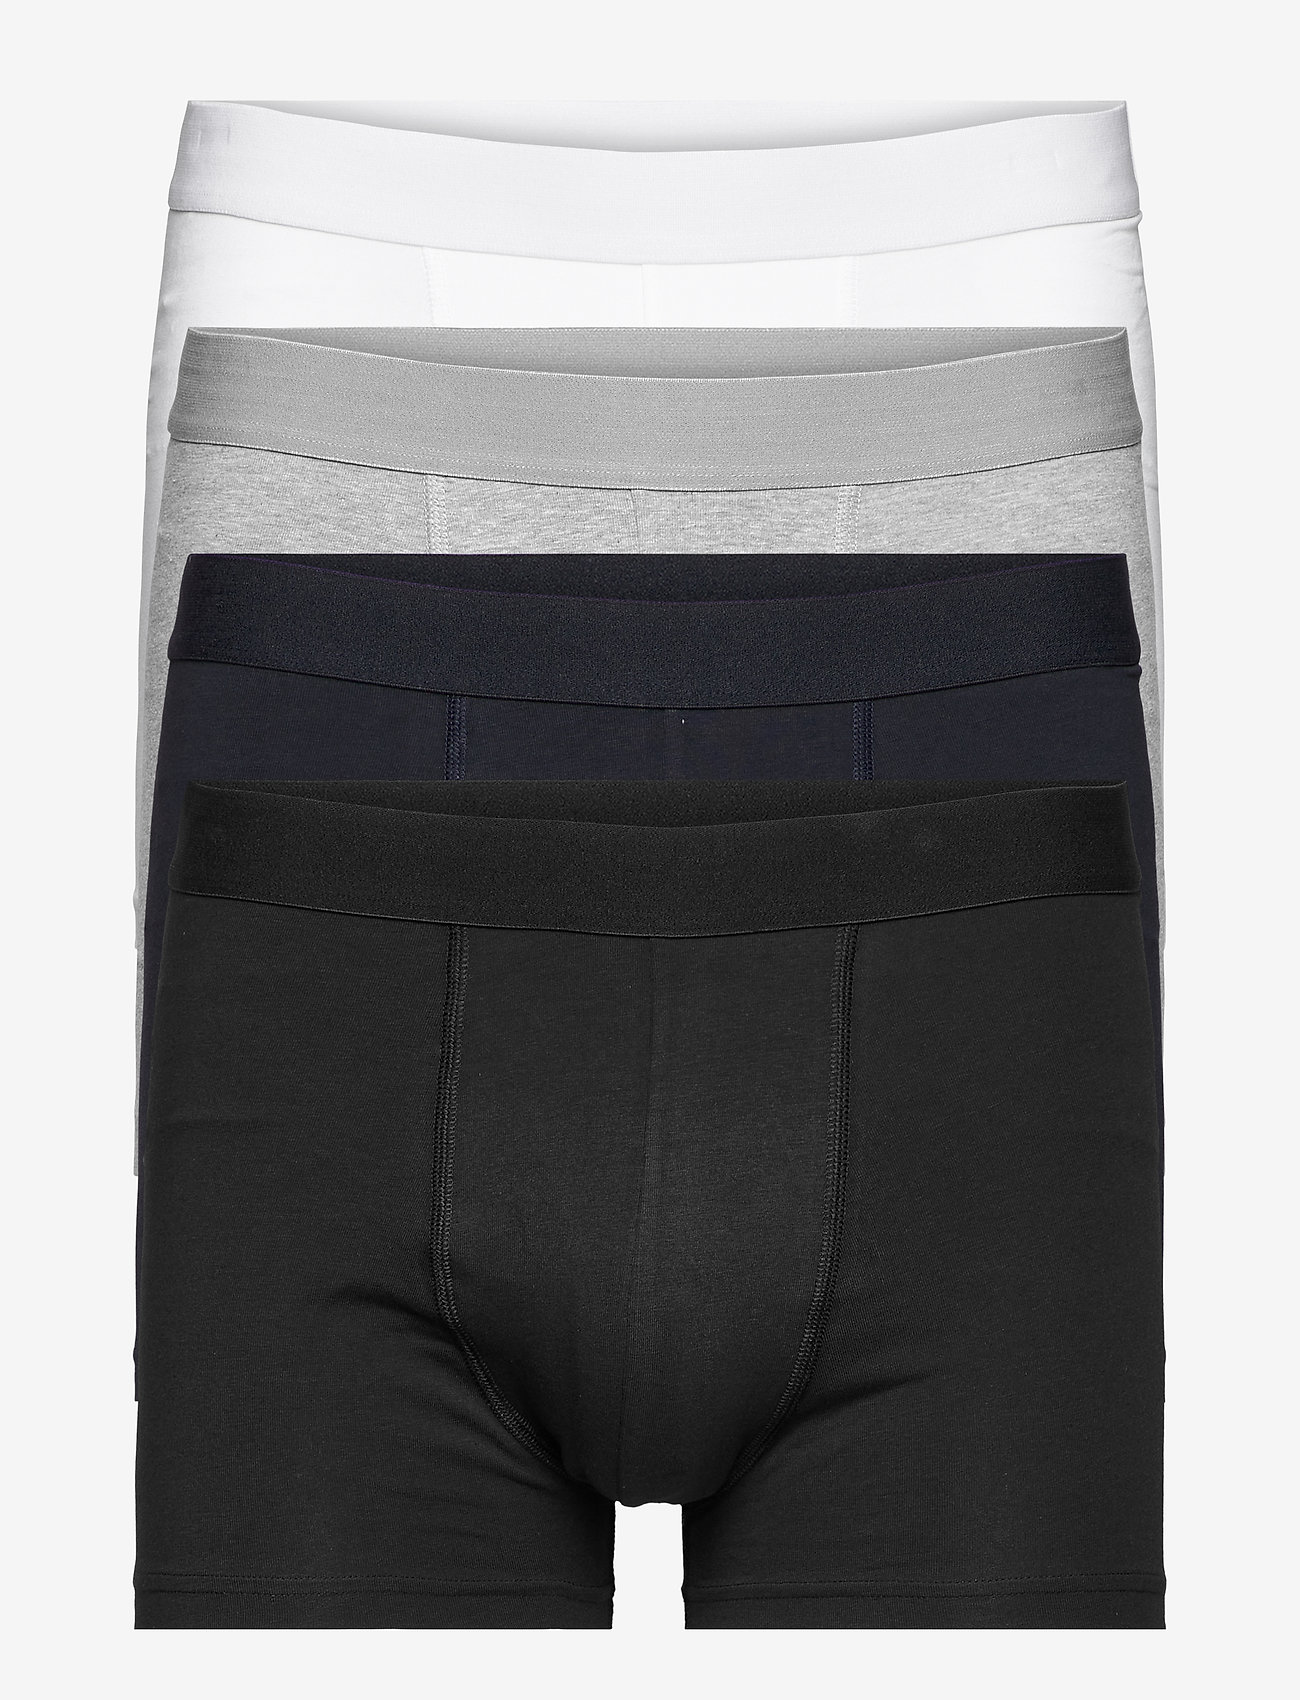 Bread & Boxers - Boxer Brief Multipack - boxers - white/back/grey/navy - 0